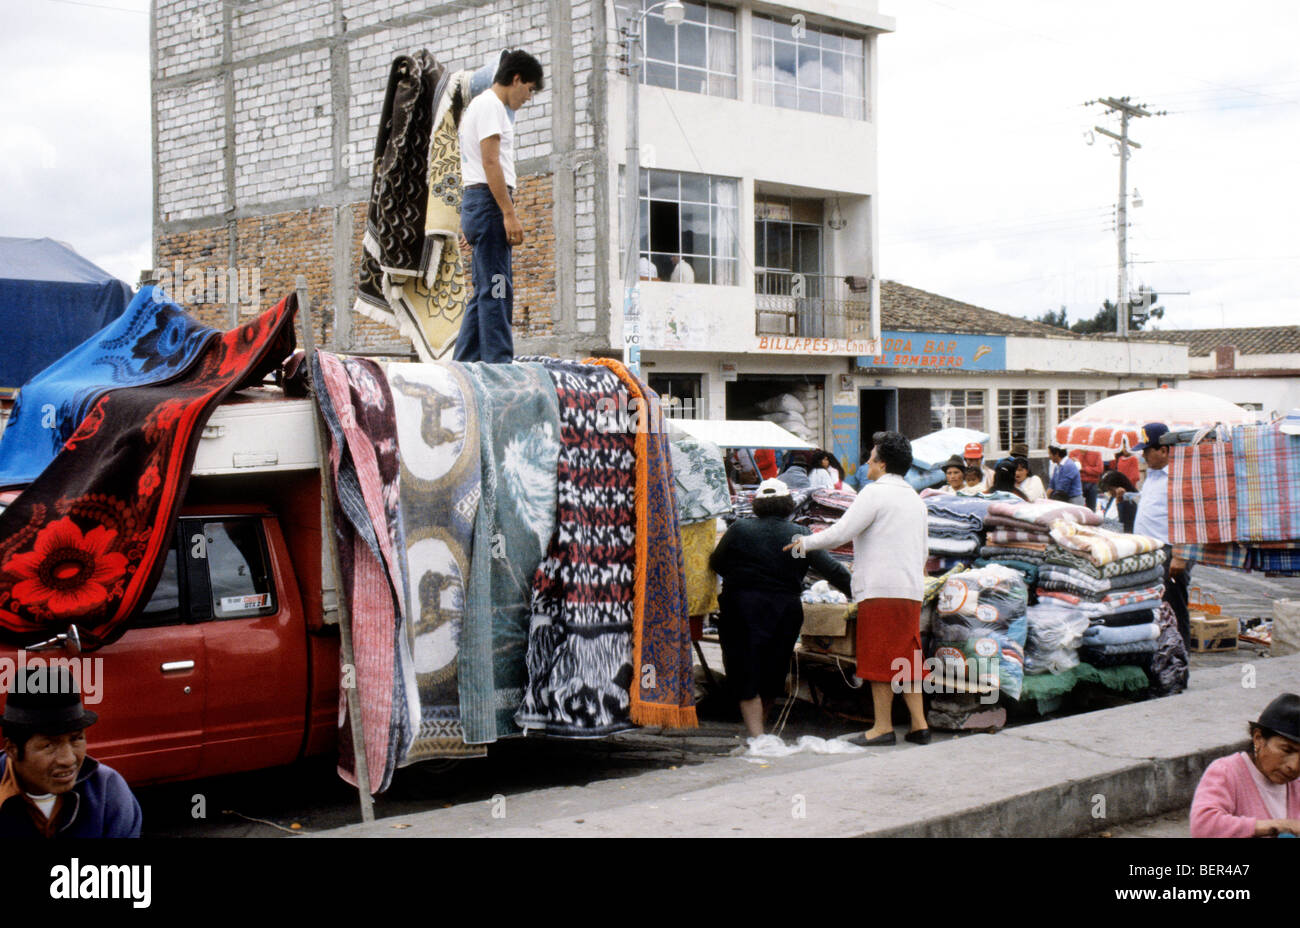 Truck draped in blankets and rugs with large pile of them stacked up behind he truck.  Ecuador highlands. Stock Photo